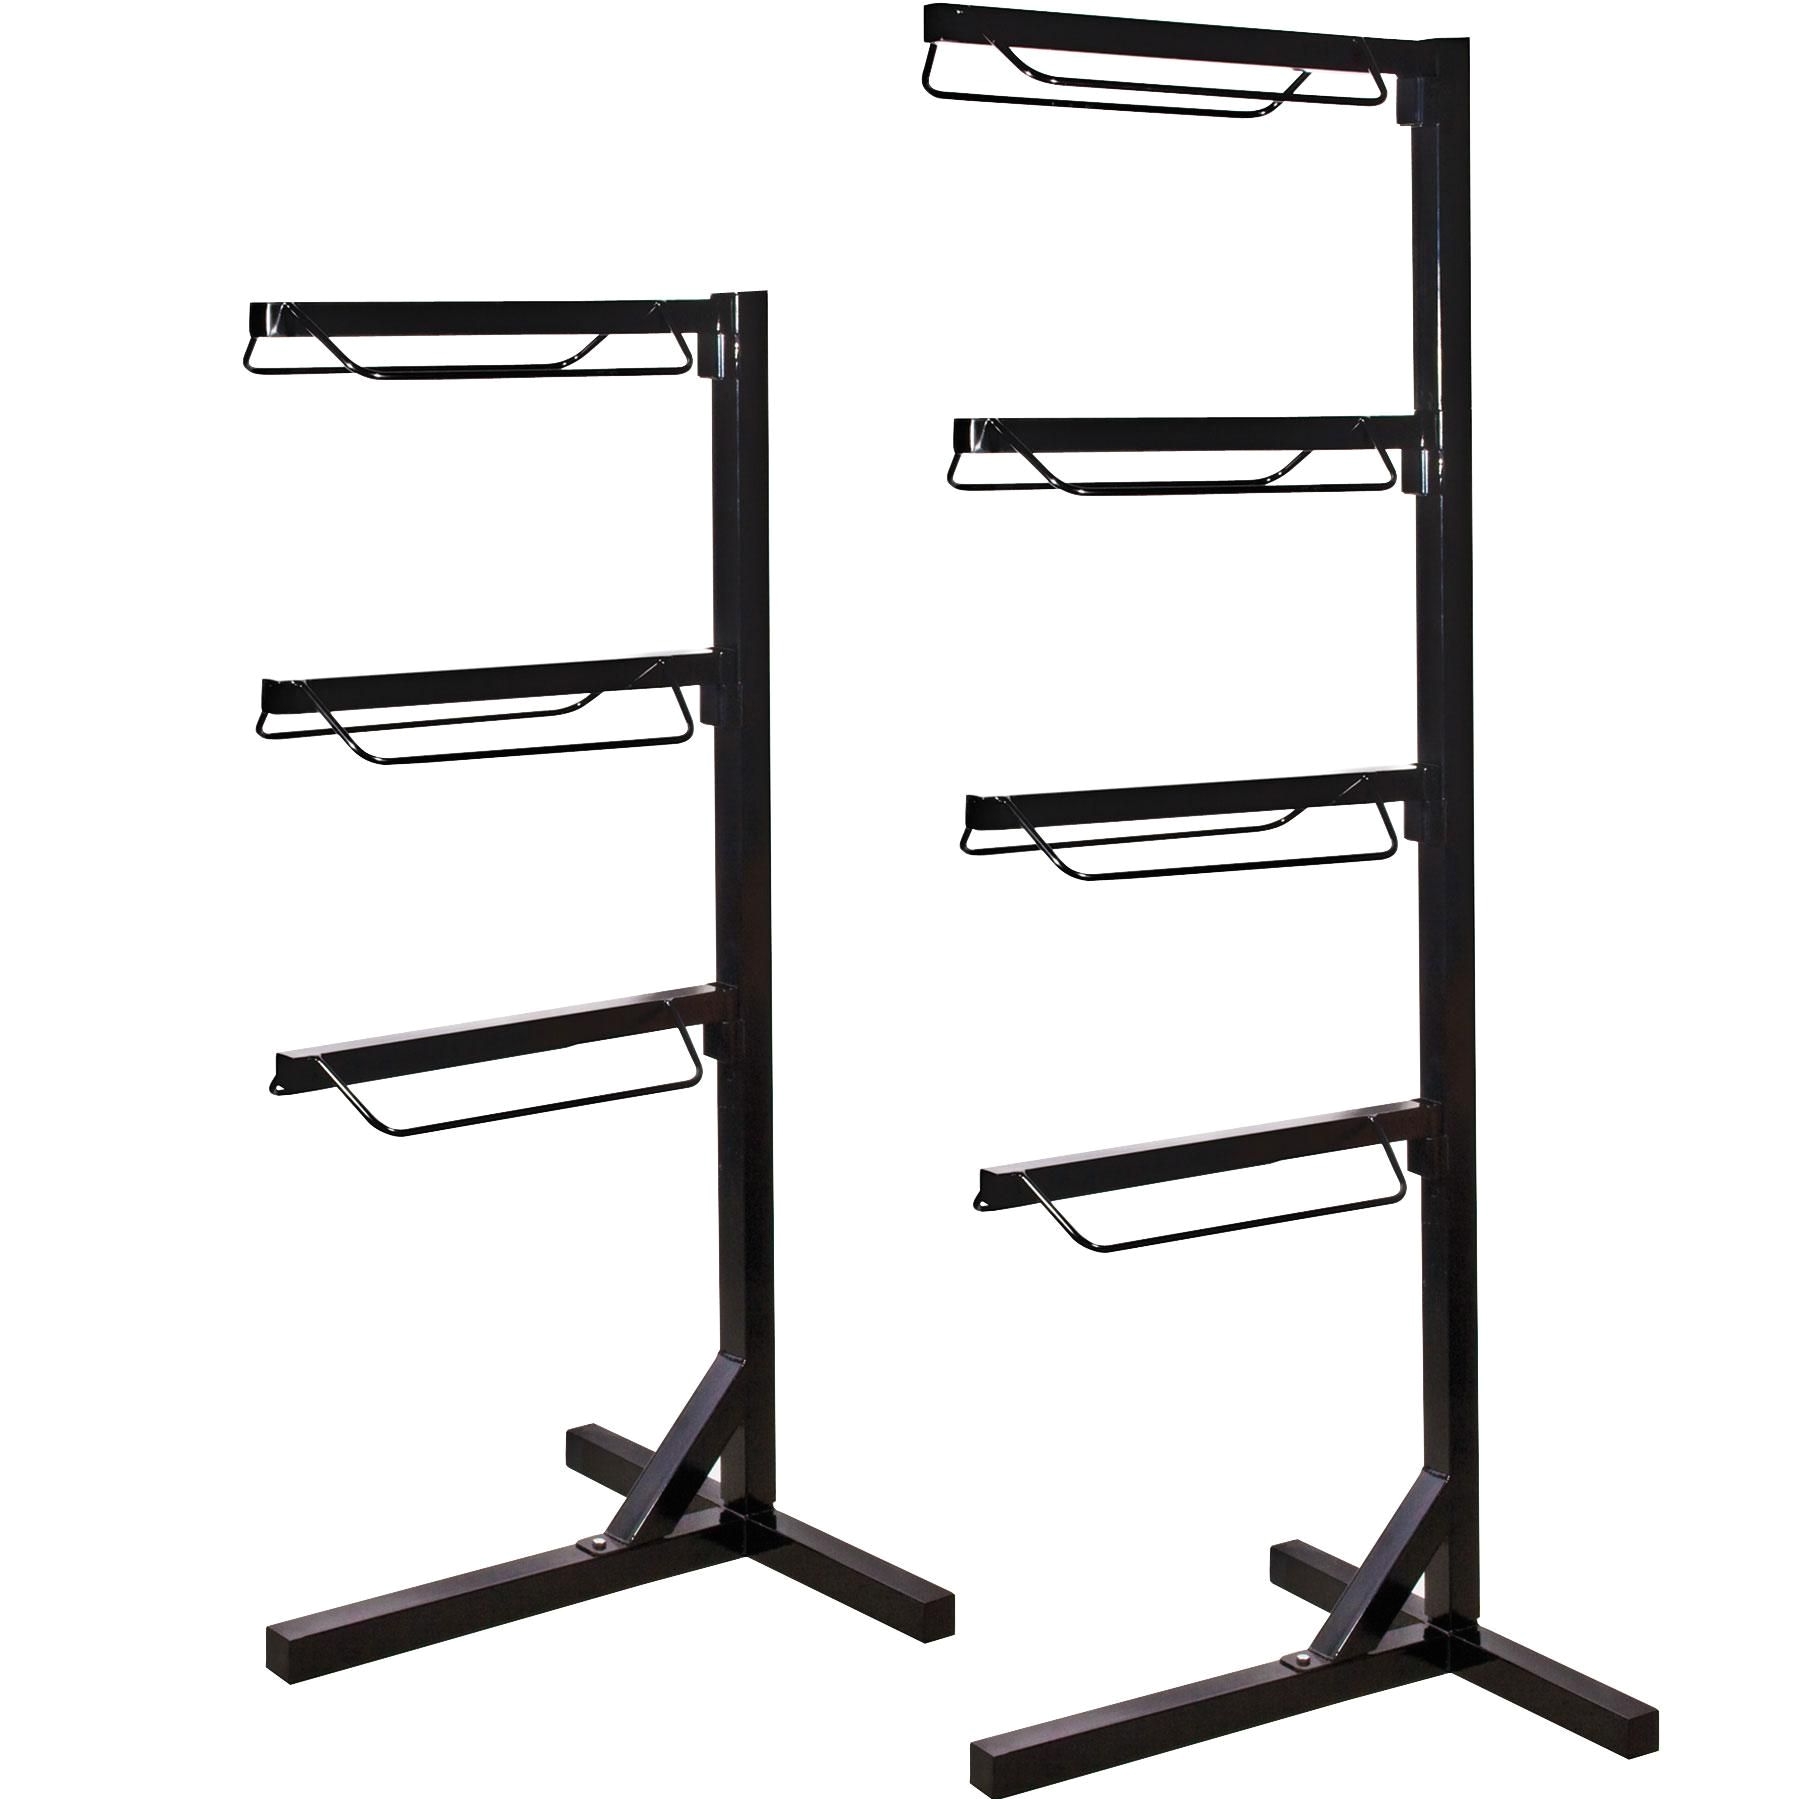 this free standing heavy duty steel rack will properly hold your english and western saddles and can be dissambled in a few minutes to easily use at show